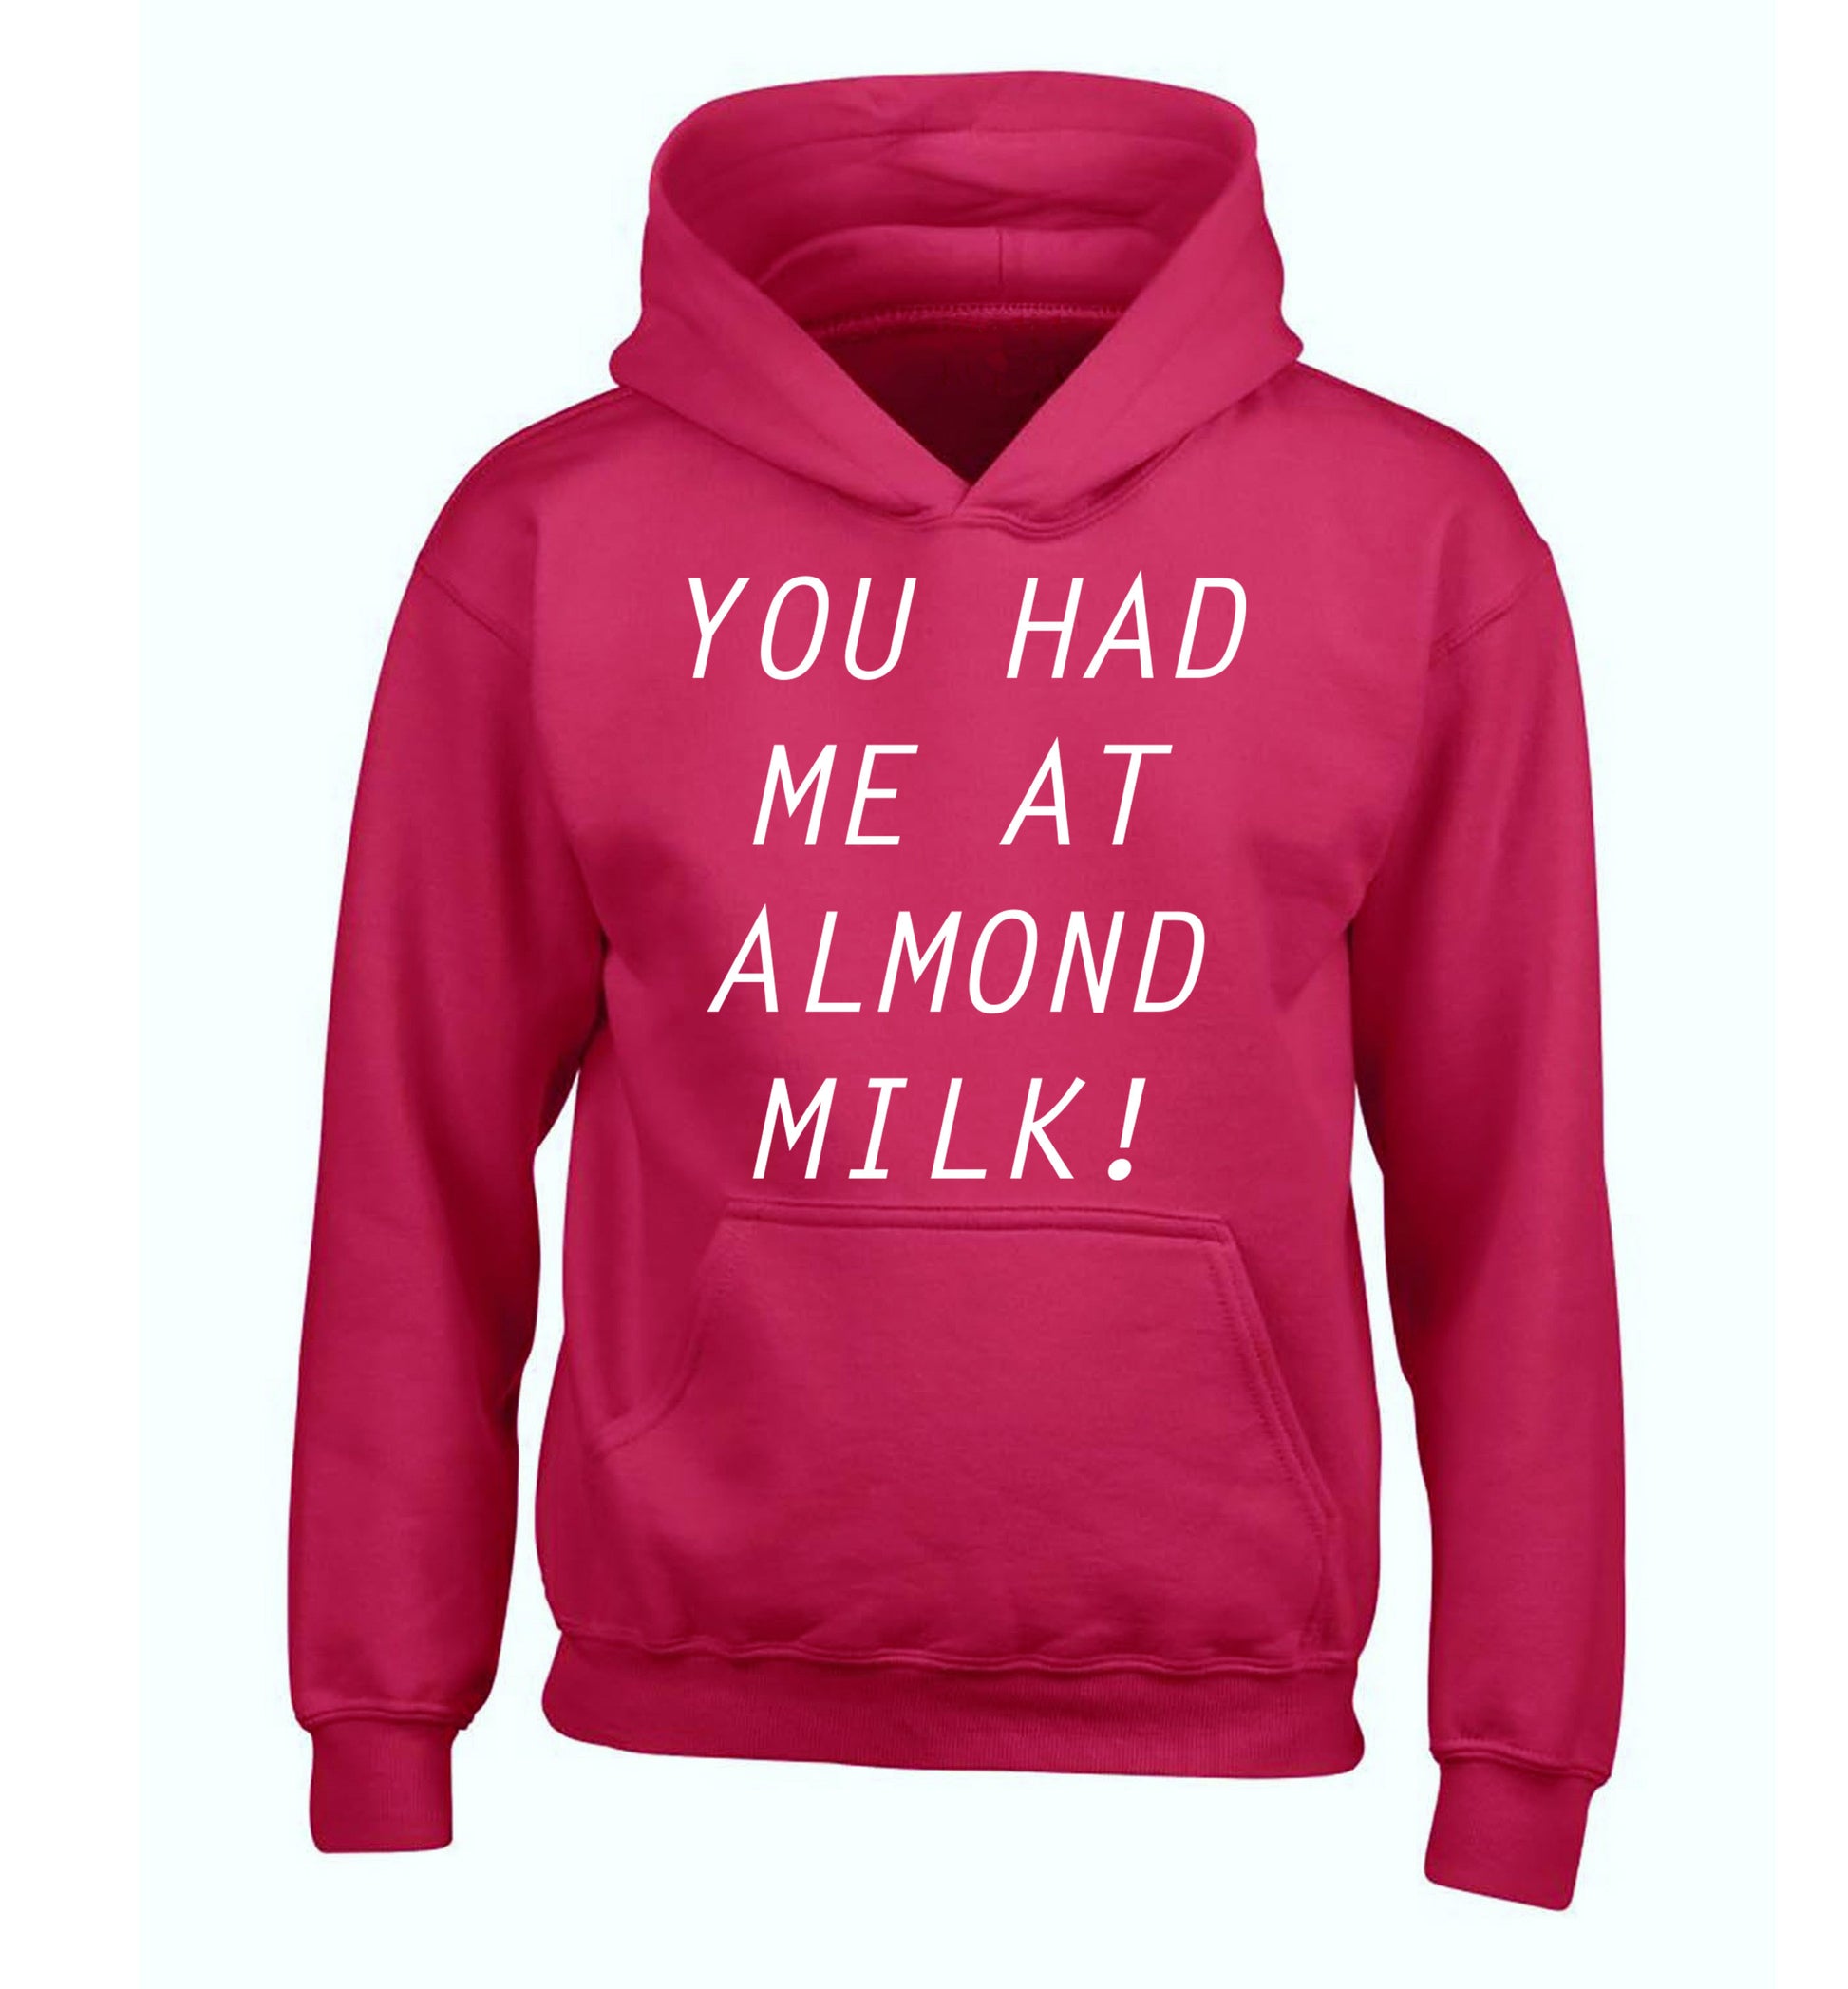 You had me at almond milk children's pink hoodie 12-14 Years